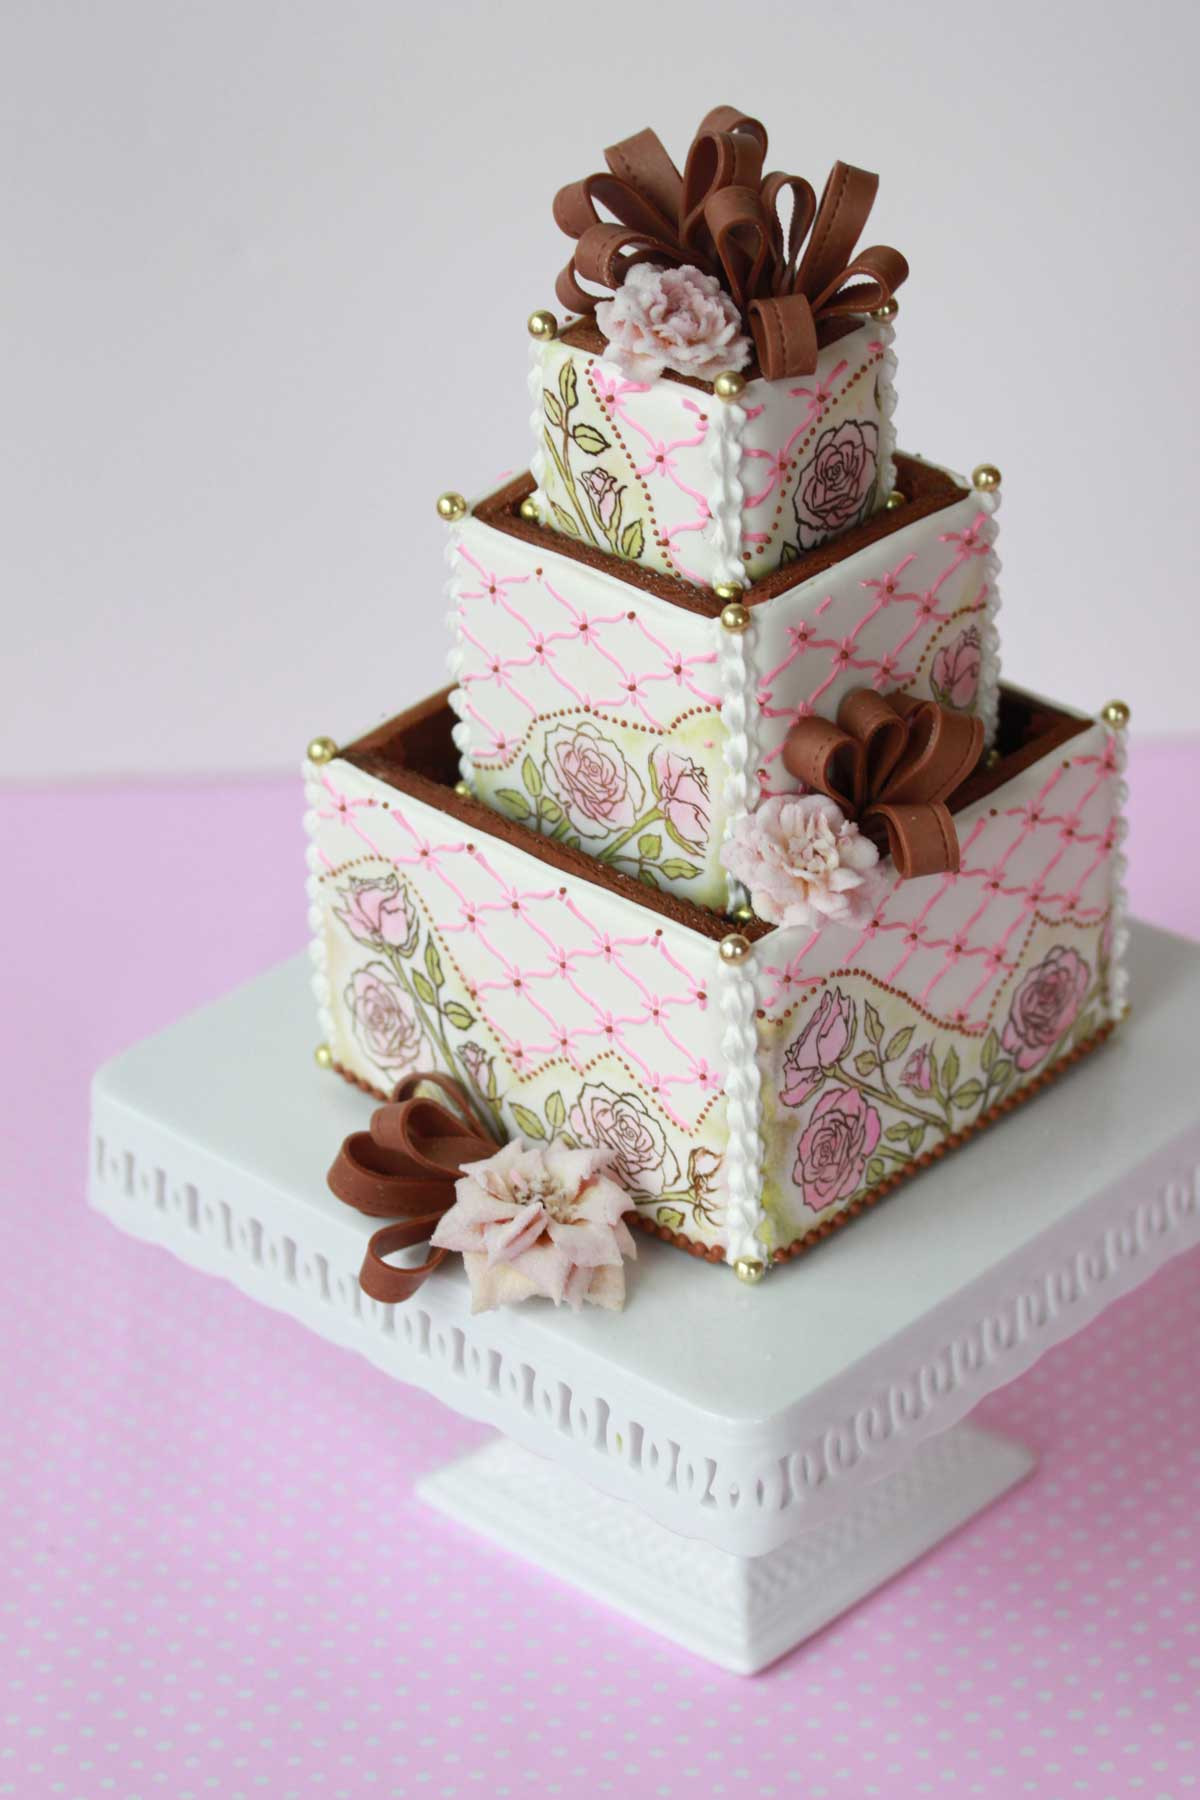 3D Wedding Cakes
 Video Release How to Assemble 3 D Cookie Wedding Cake